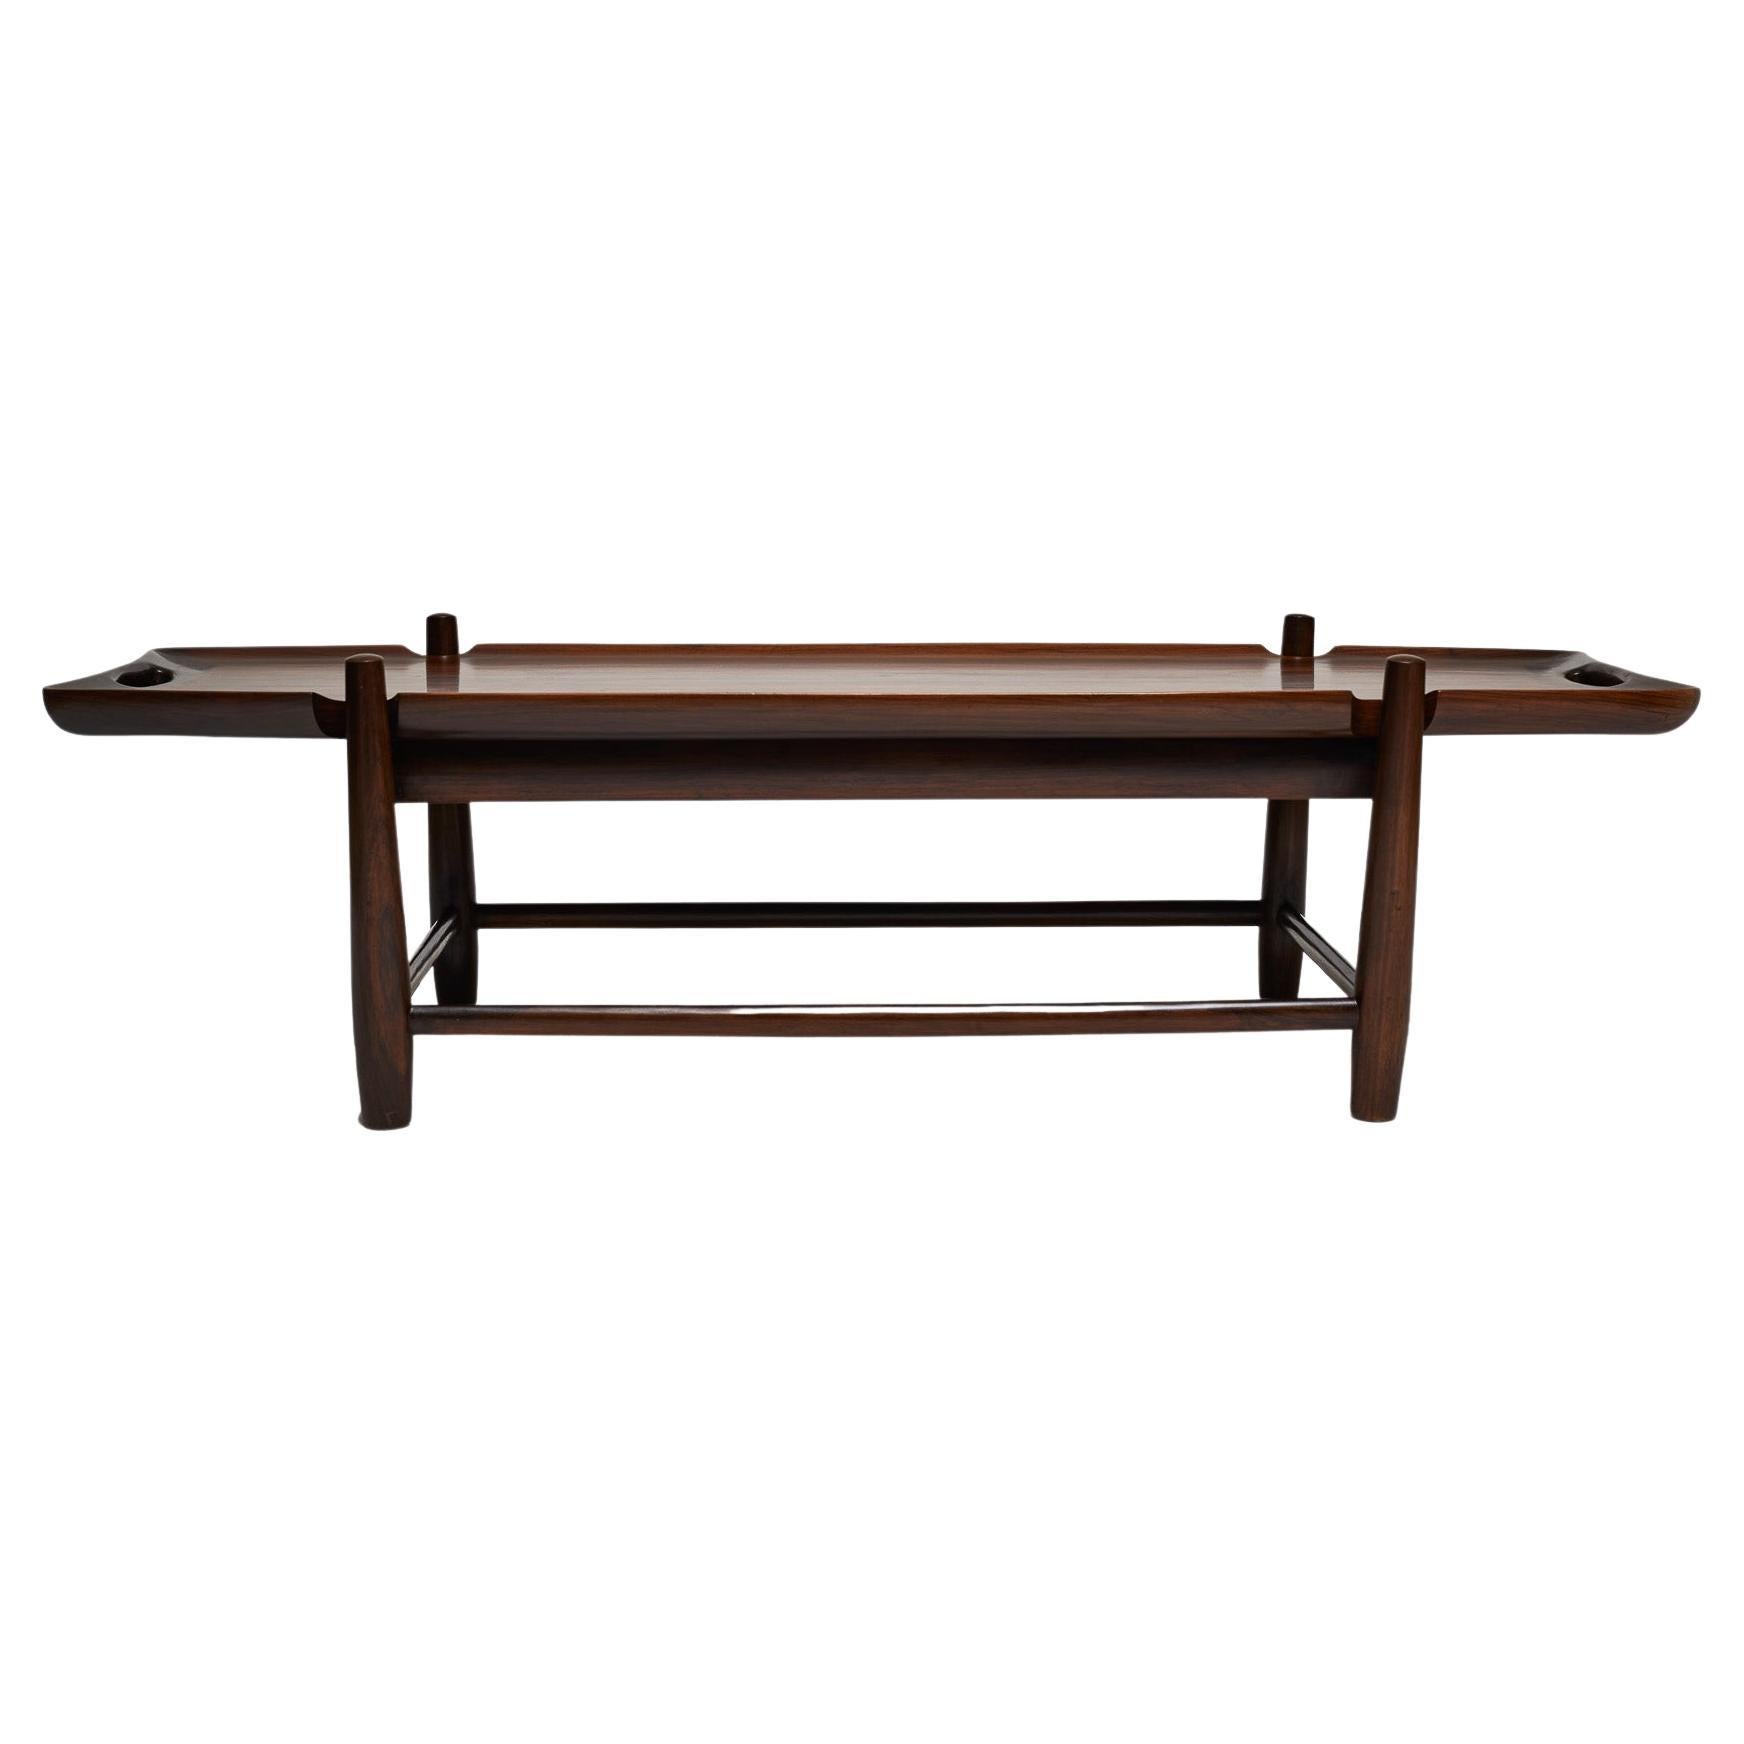 Mid-Century Modern Coffee Table in Hardwood by Sergio Rodrigues, Brazil, 1958